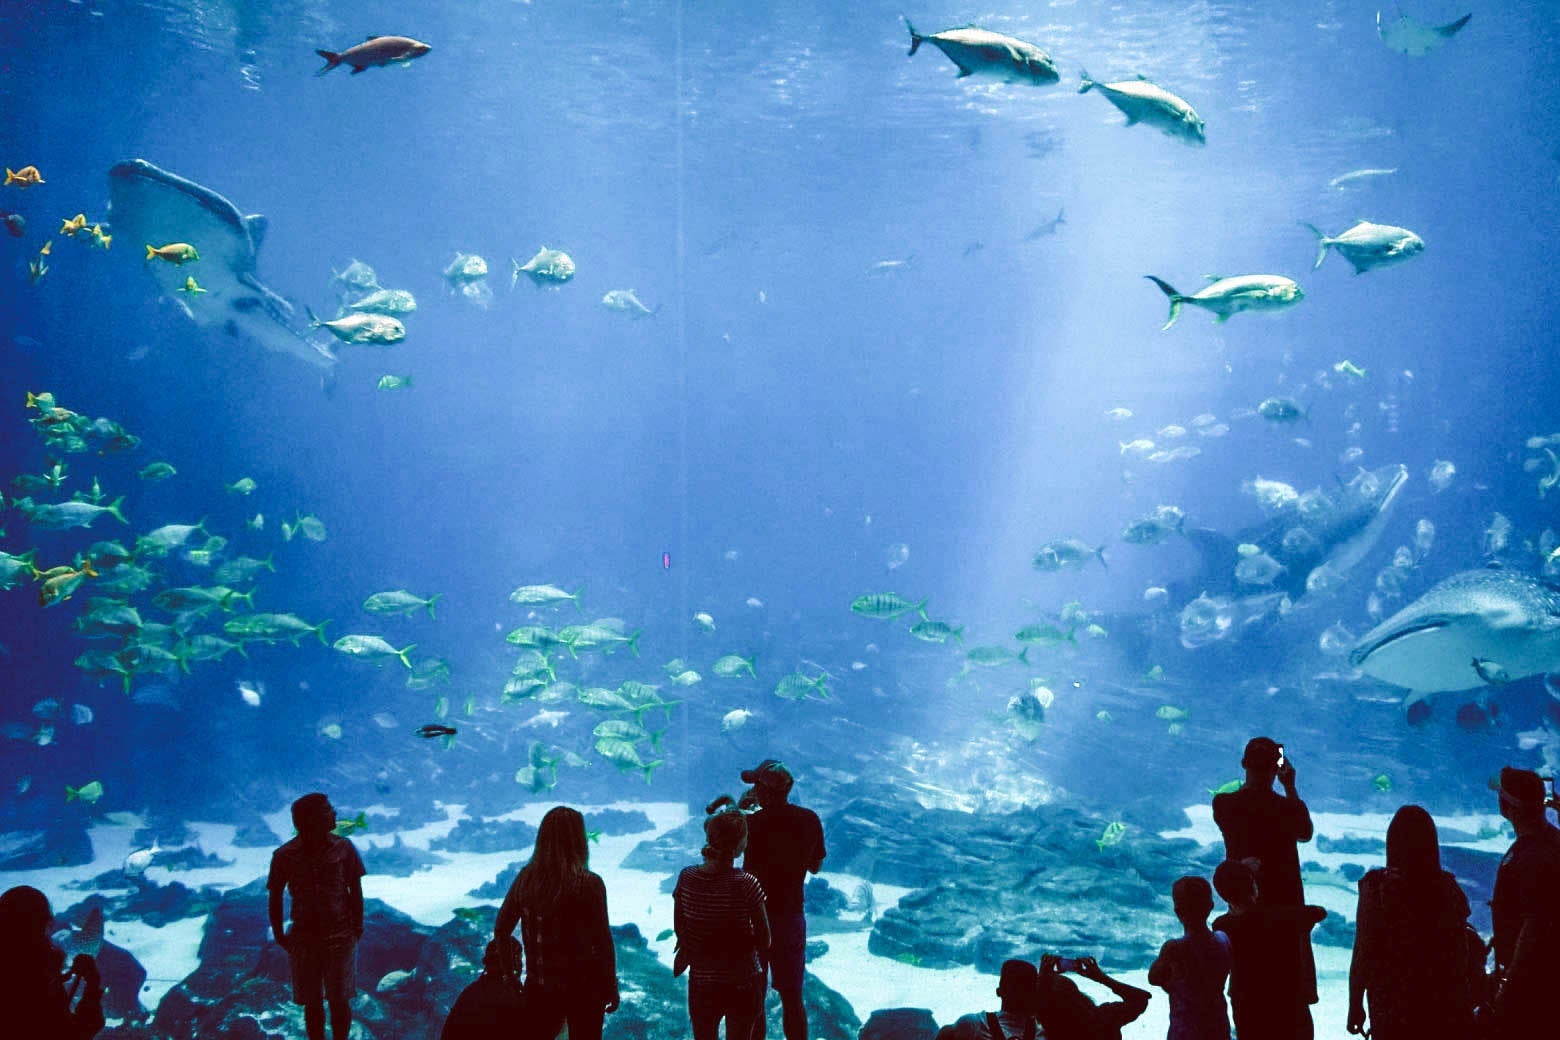 People standing in silhouette in front of a giant aquarium featuring many different types of fish.